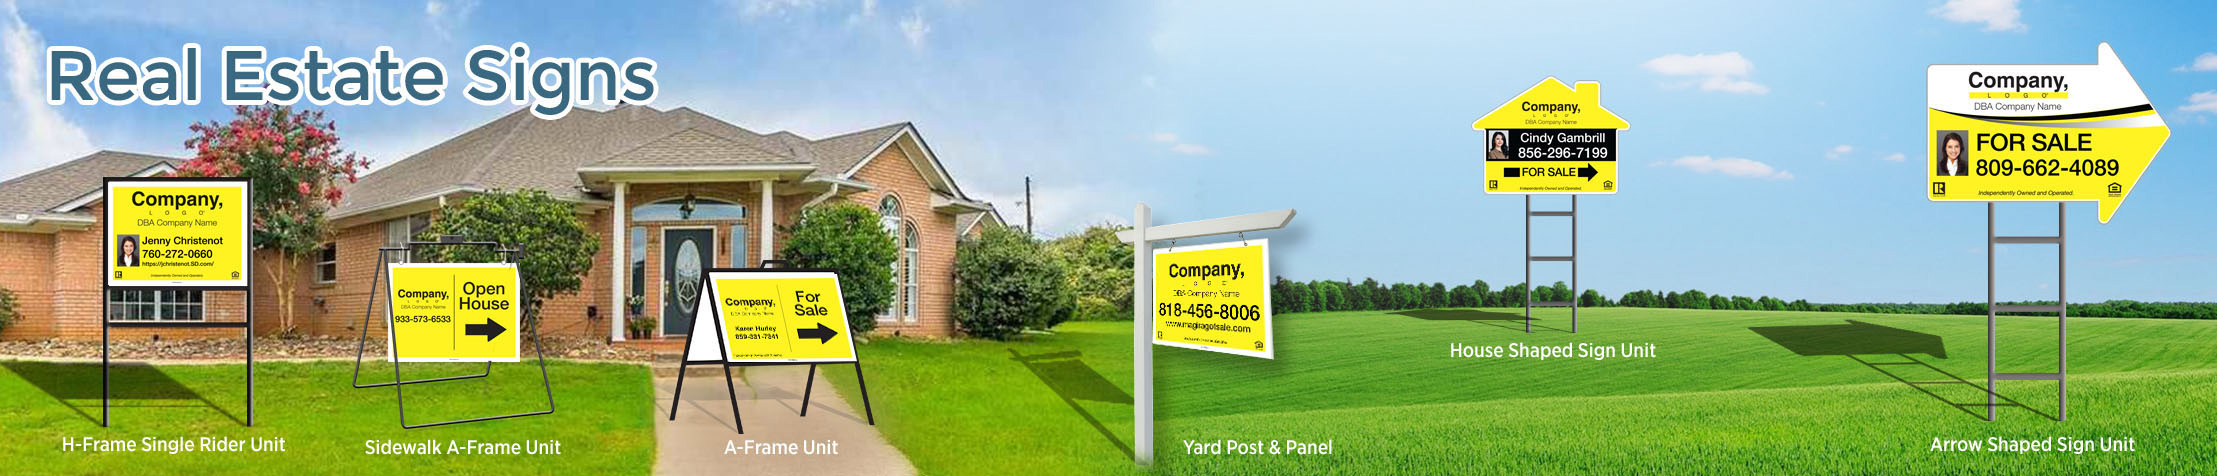 Weichert Real Estate Signs - Weichert  real estate signs - H-Frame Units, Directional Signs, A-Frame Units, Yard Post and Panel | BestPrintBuy.com